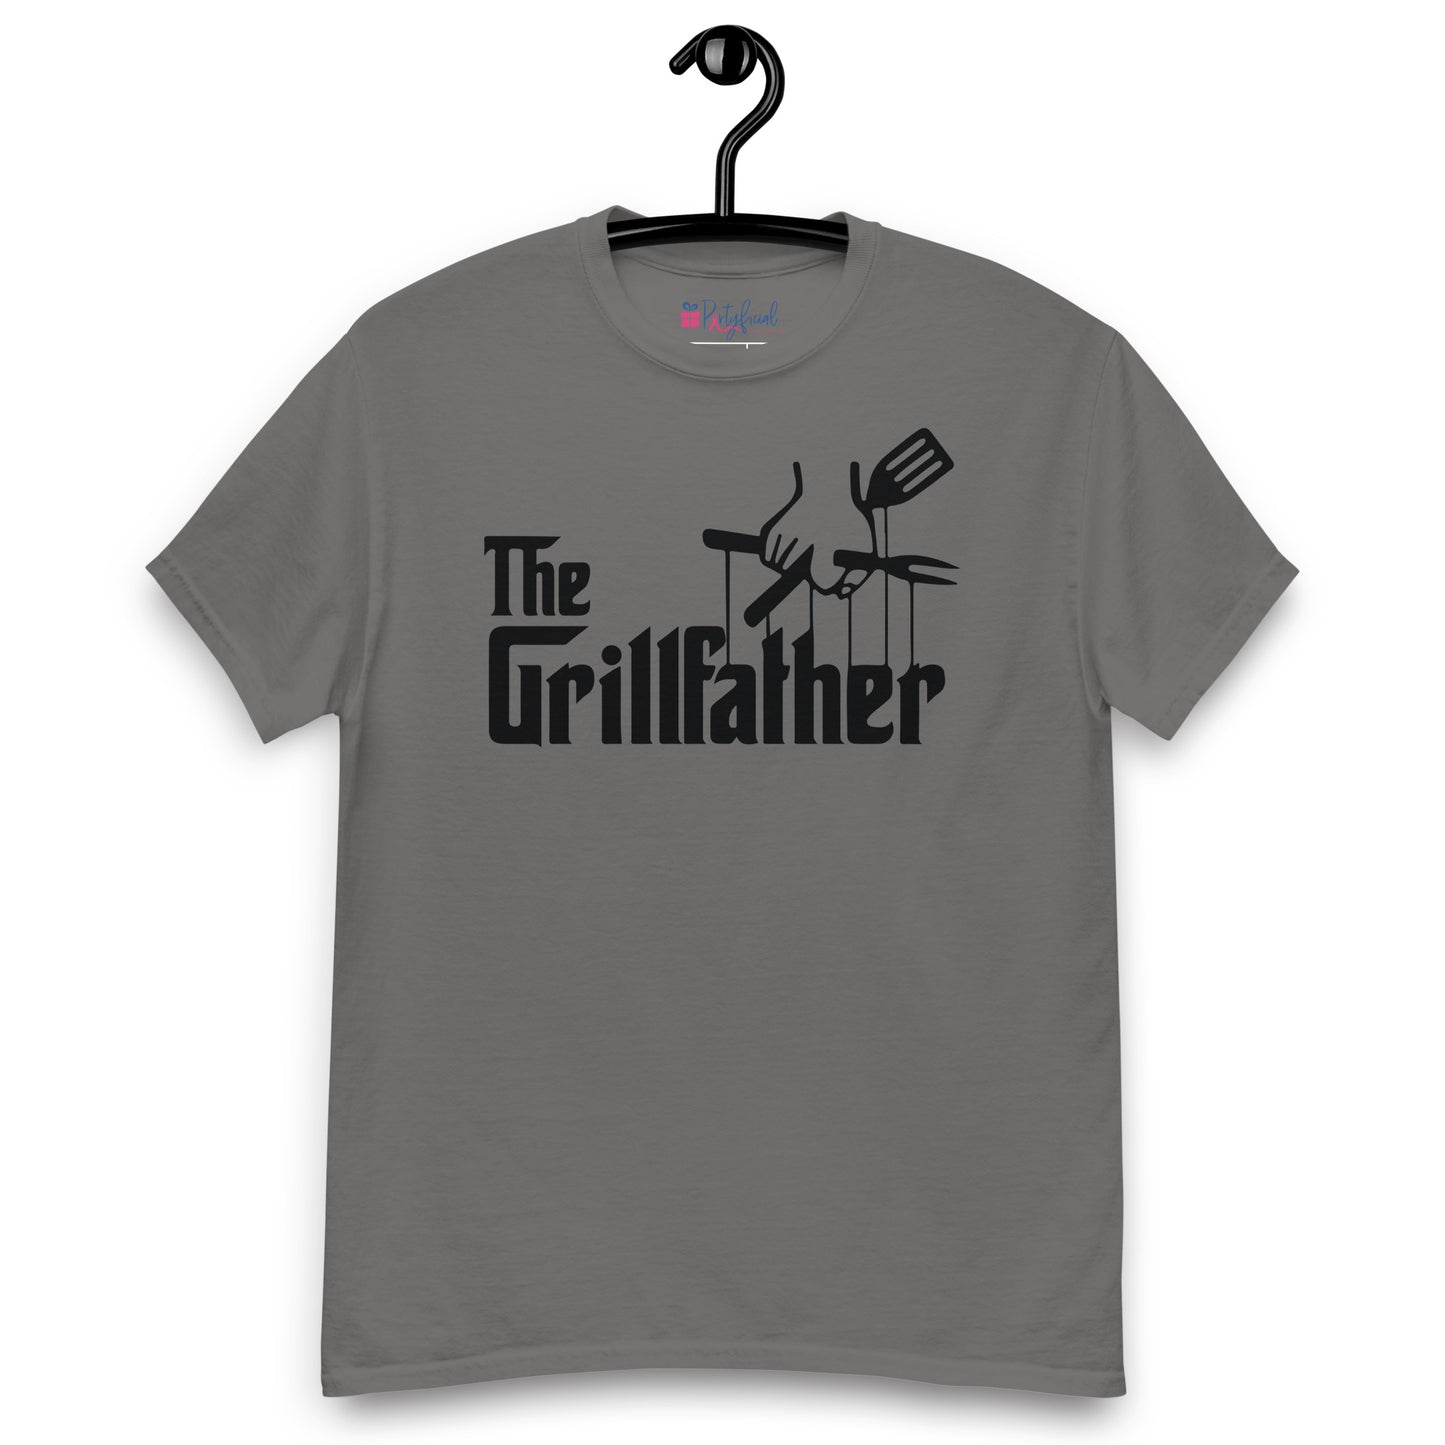 The Grill Father Tee